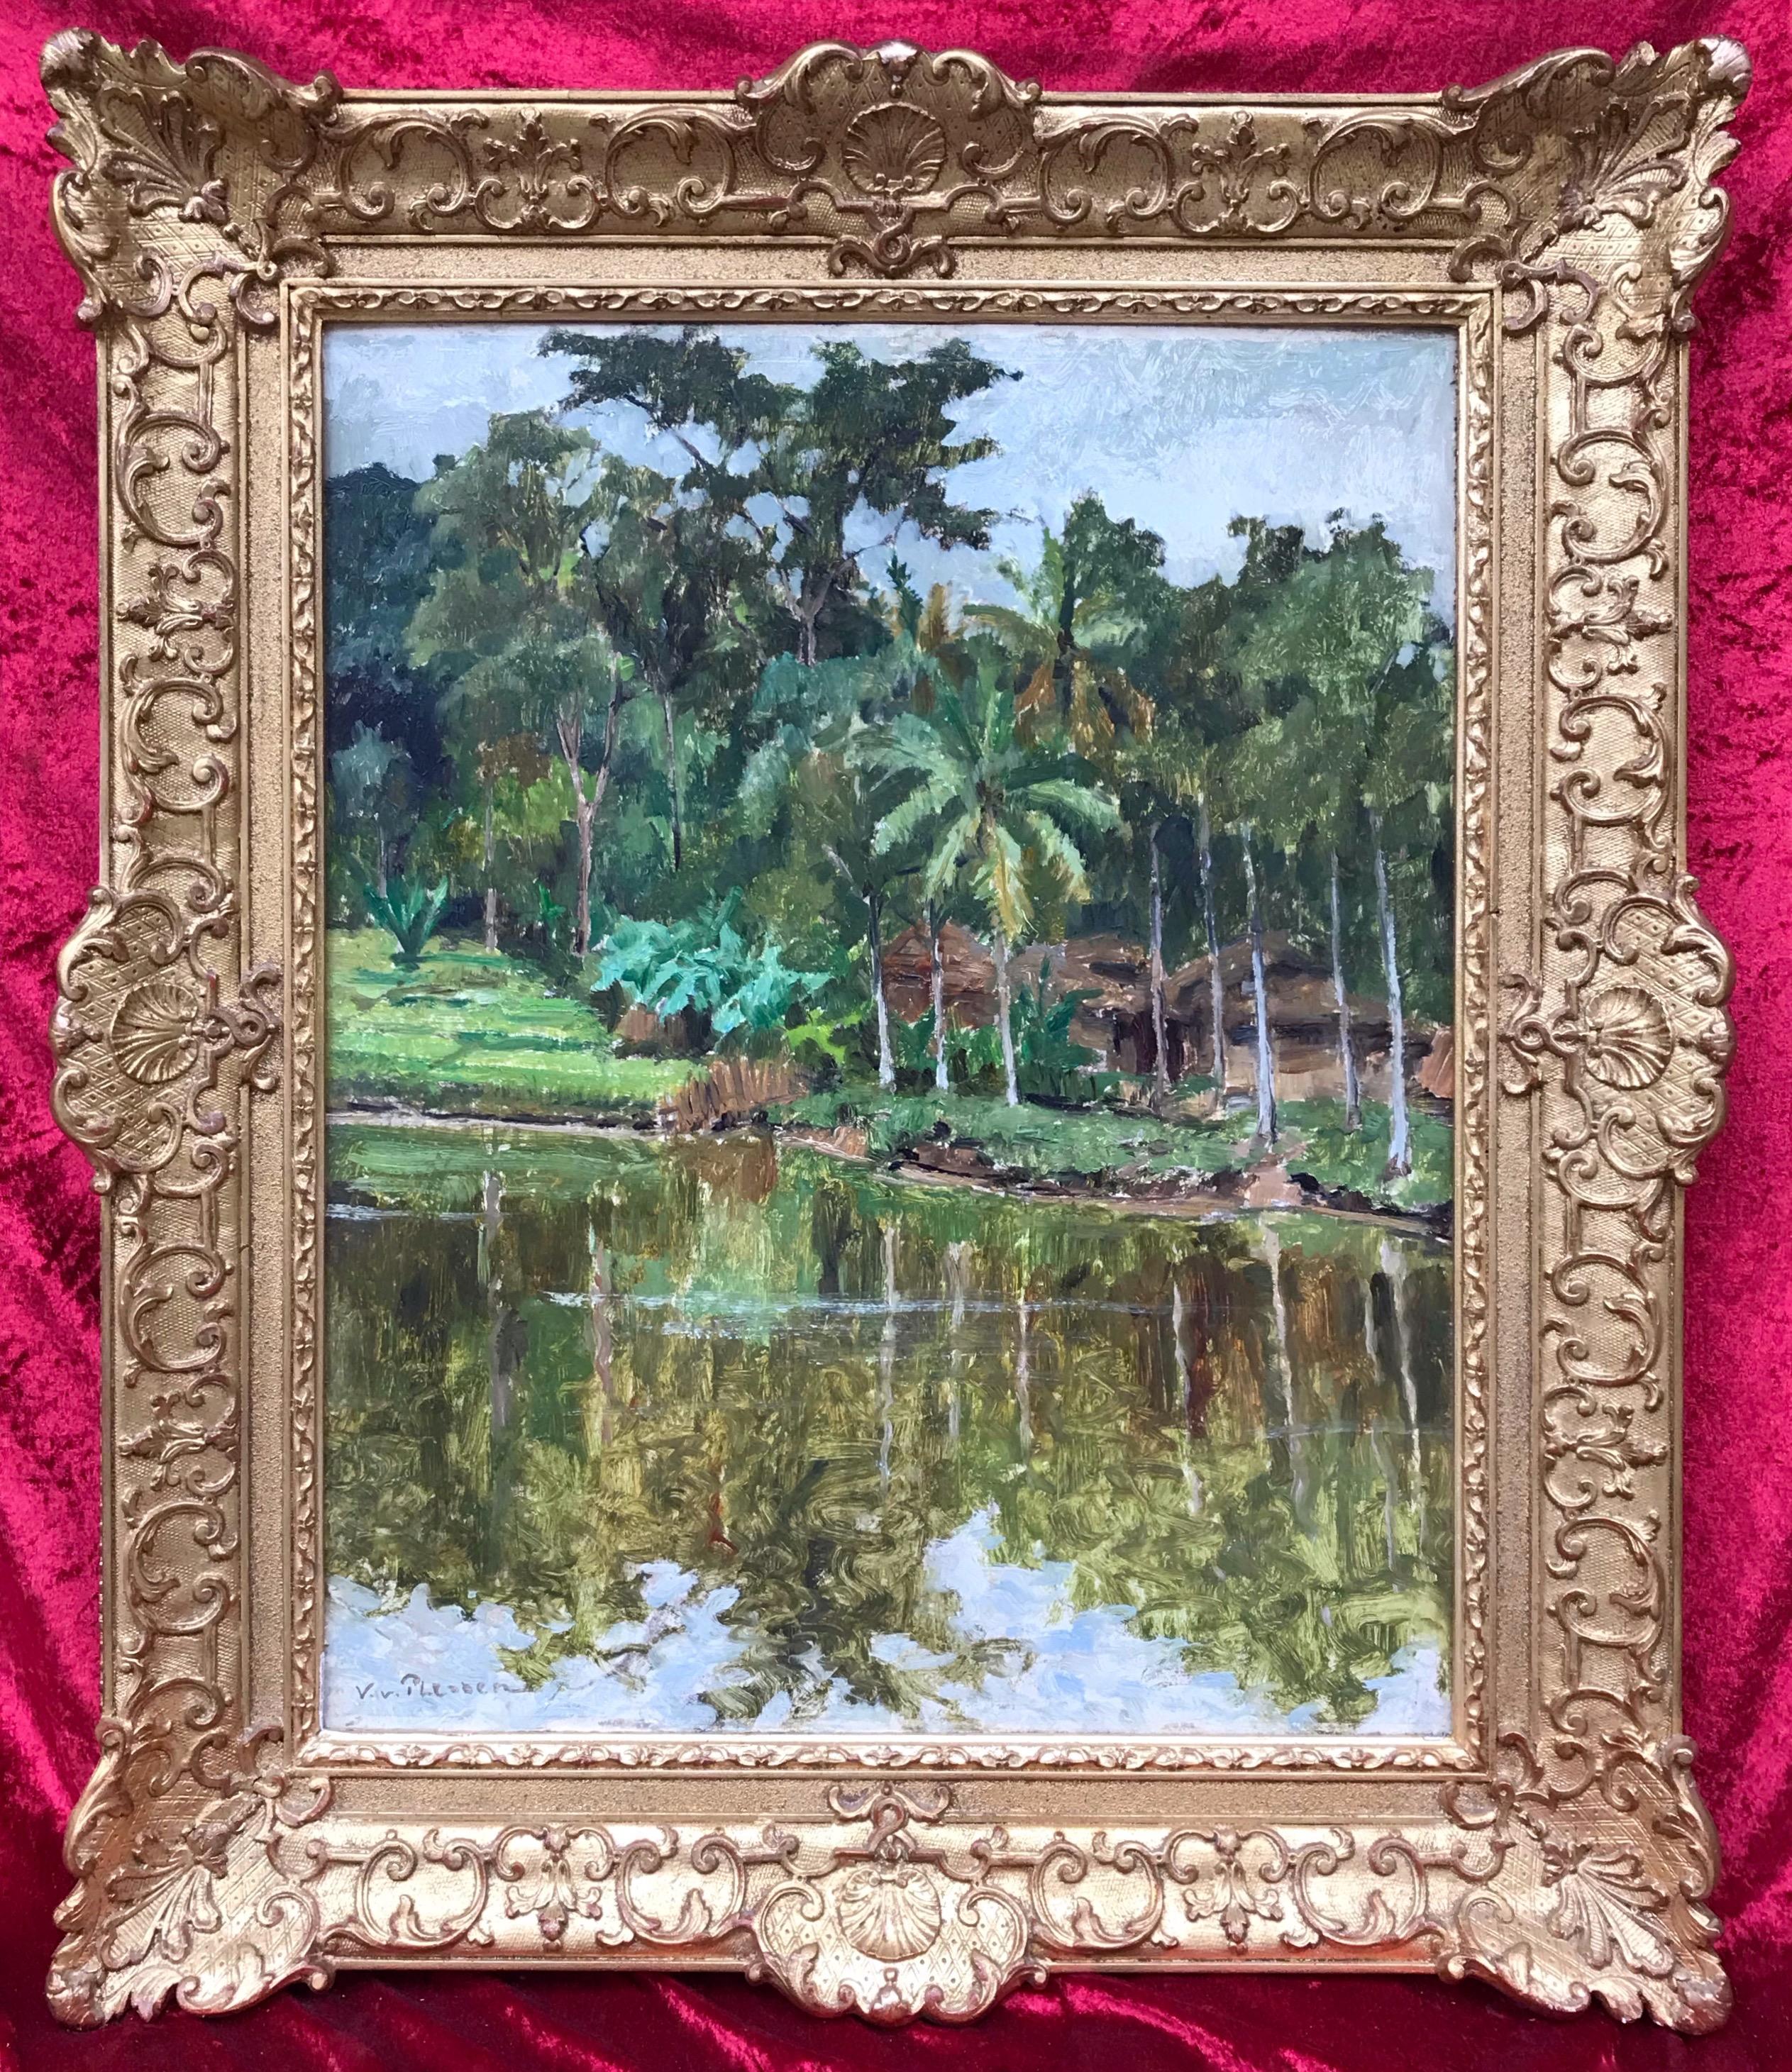 Jungle by the River - Original Old painting  